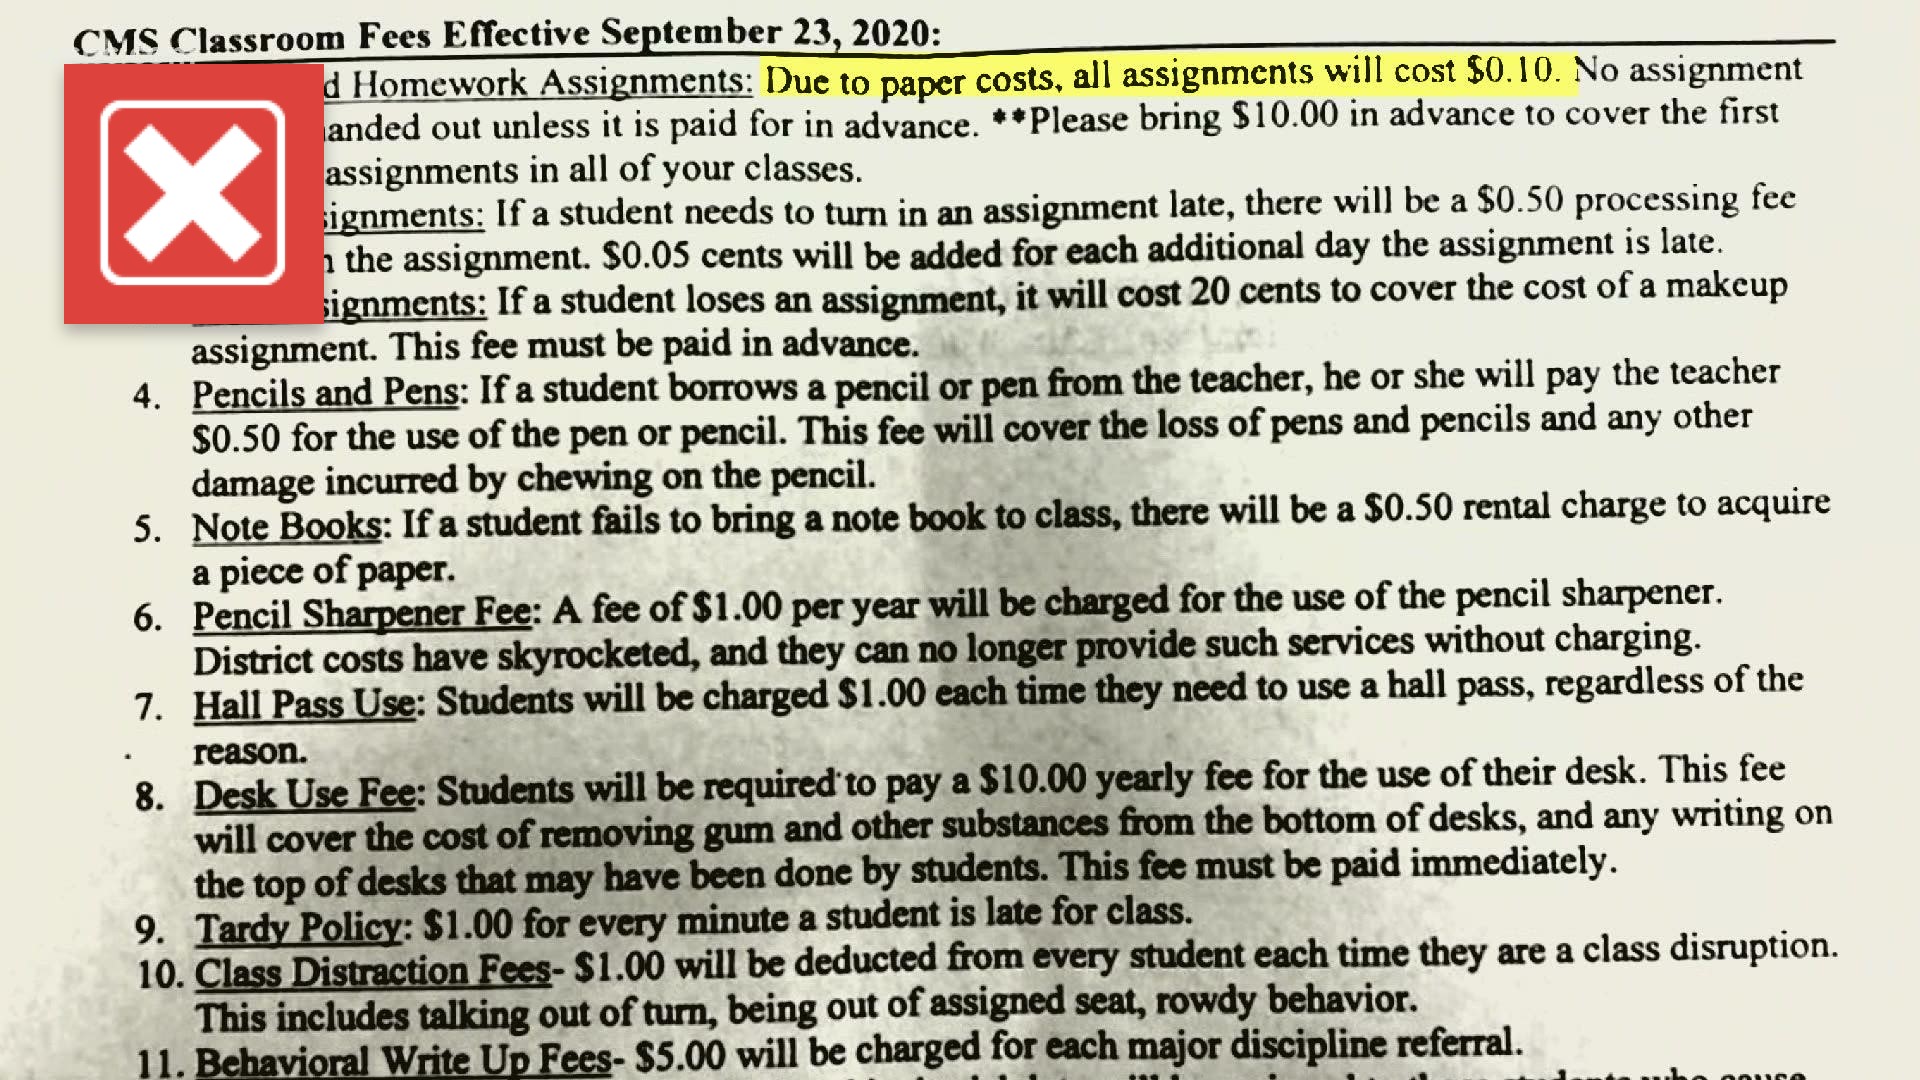 A letter making its way around some Charlotte classrooms claims students will need to pay just to do their given assignments. We verify that letter is not real.